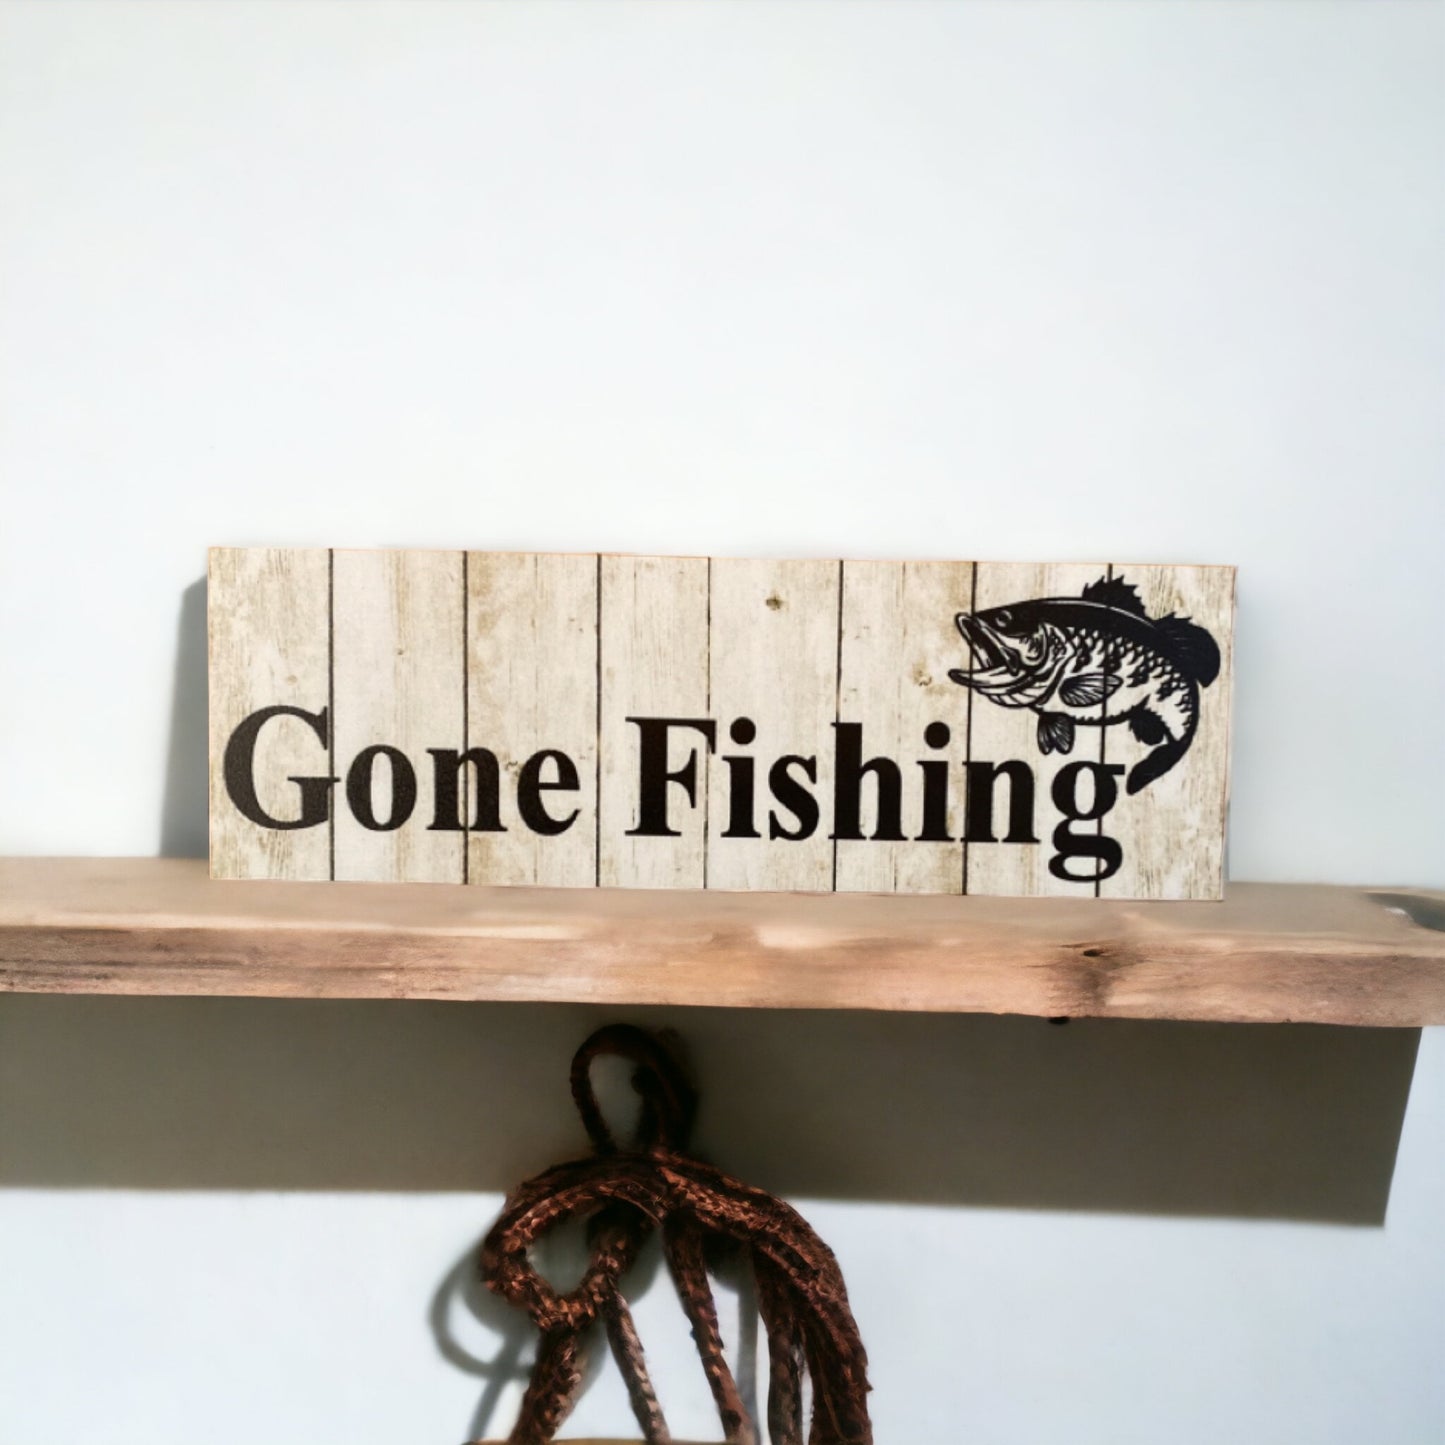 Gone Fishing with Bass Fish Sign - The Renmy Store Homewares & Gifts 